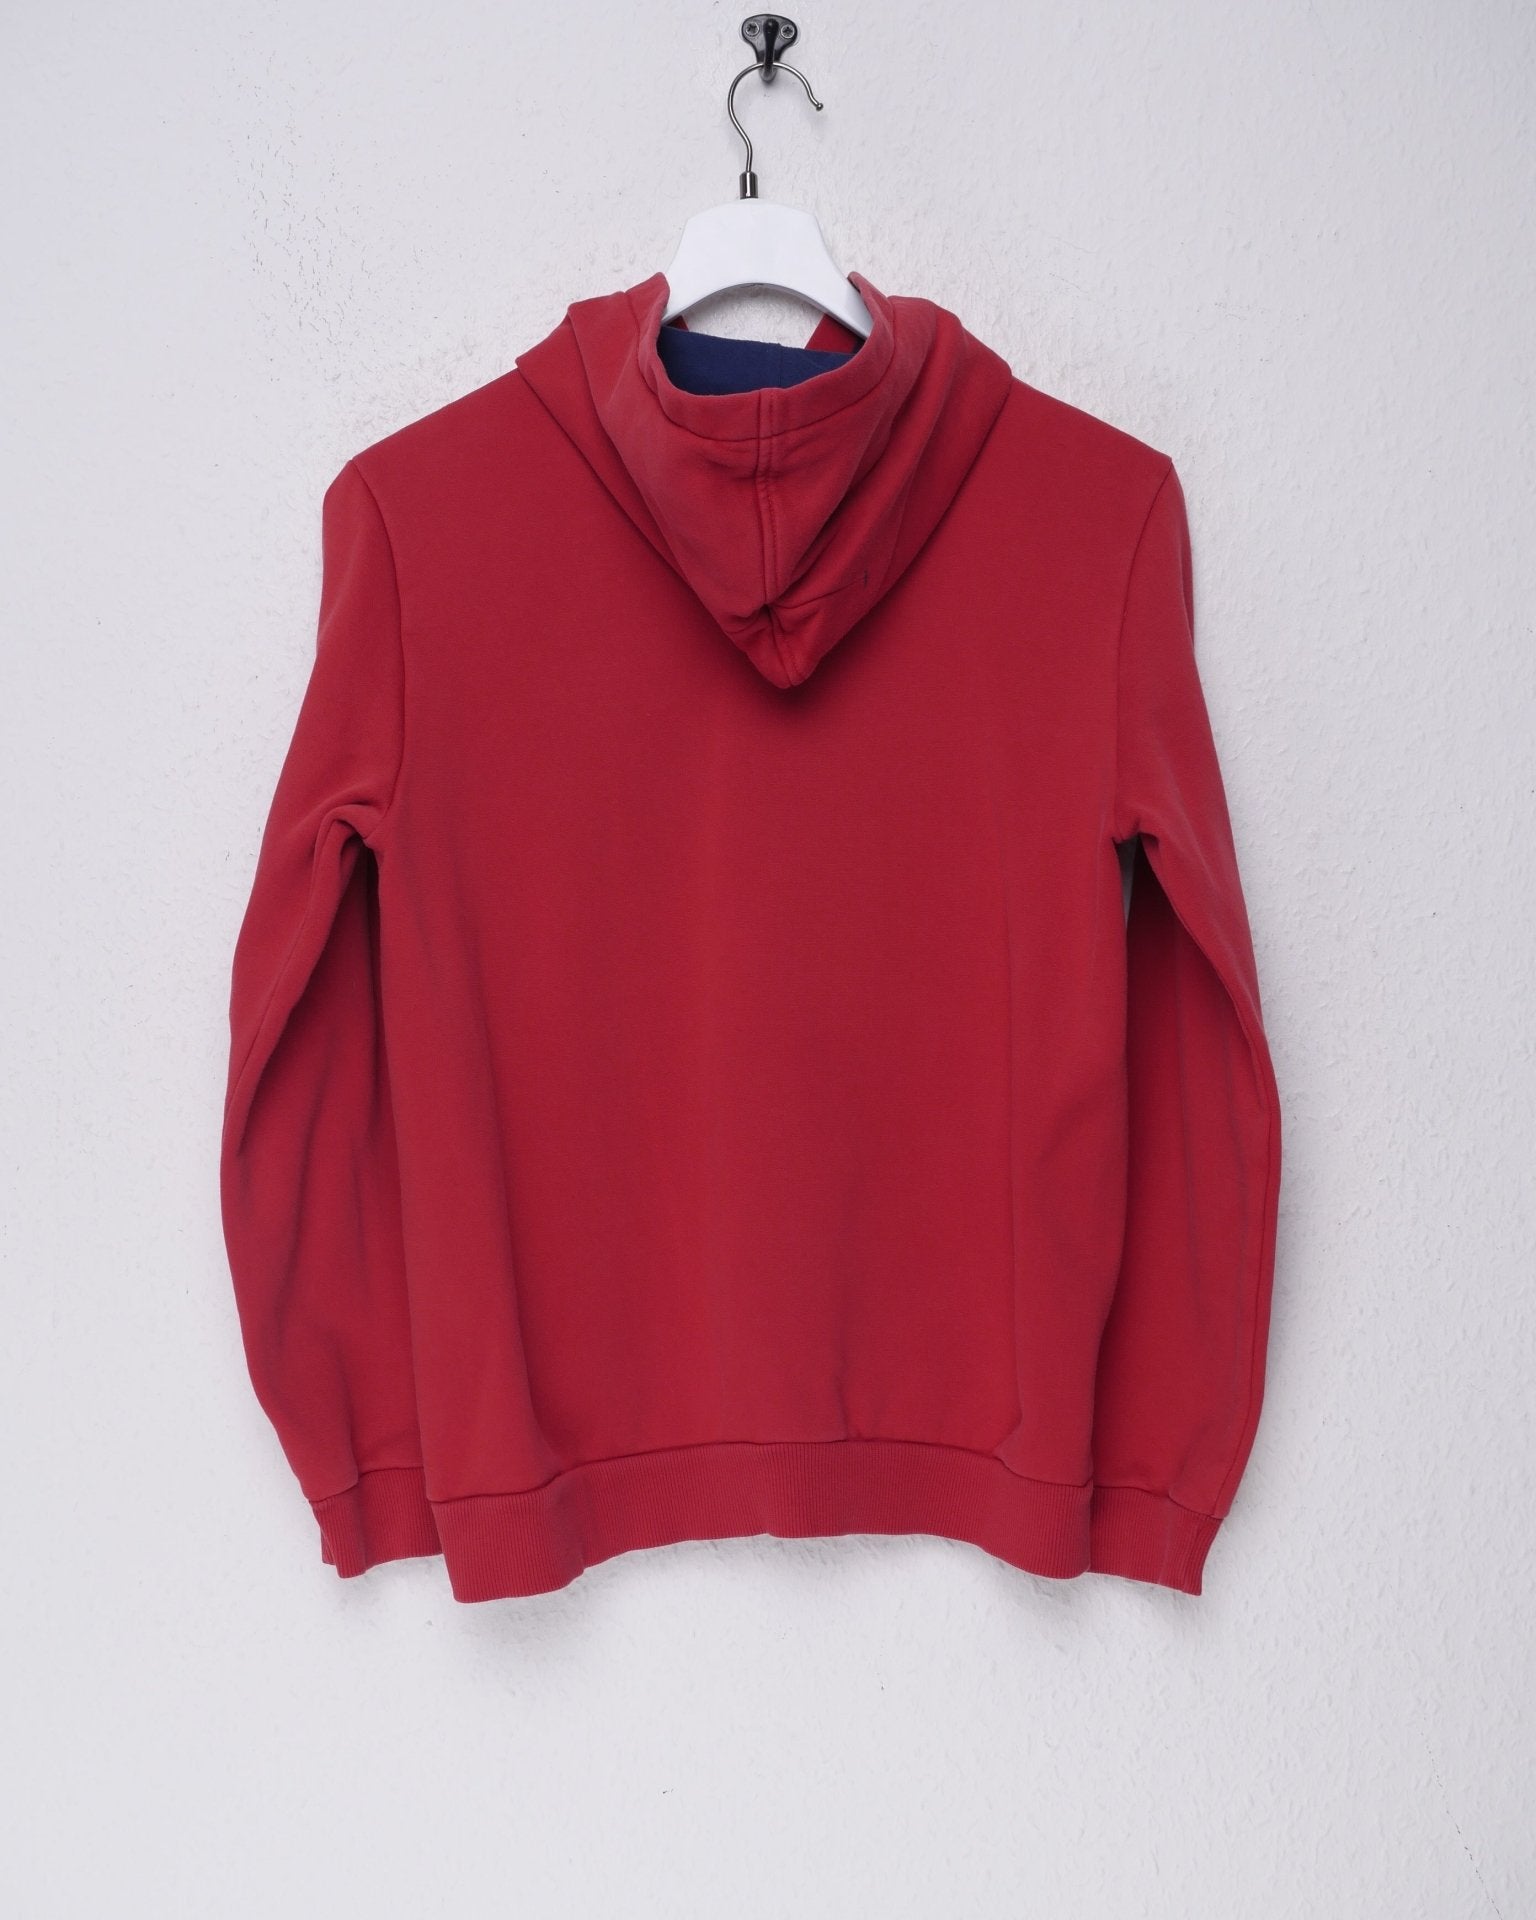 Puma embroidered Logo red Hoodie - Peeces